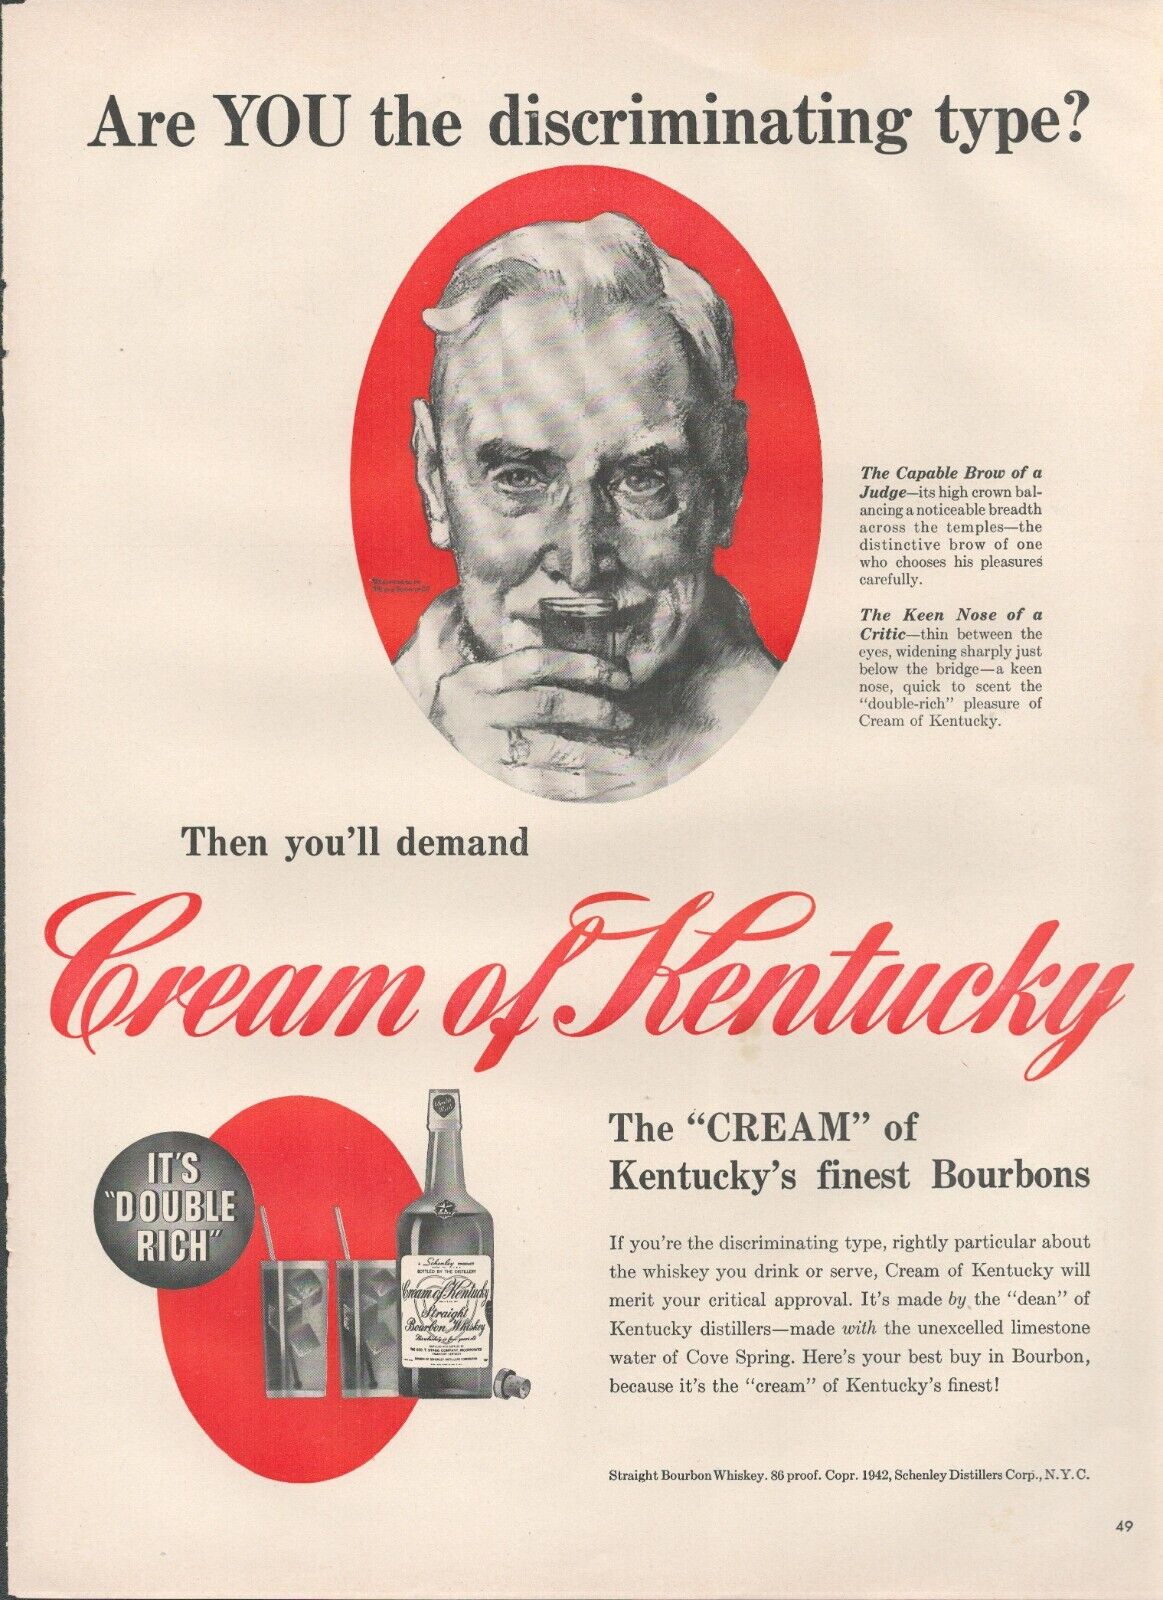 1942 Cream of Kentucky Bourbons Whisky You Discriminating Type Vintage Print Ad